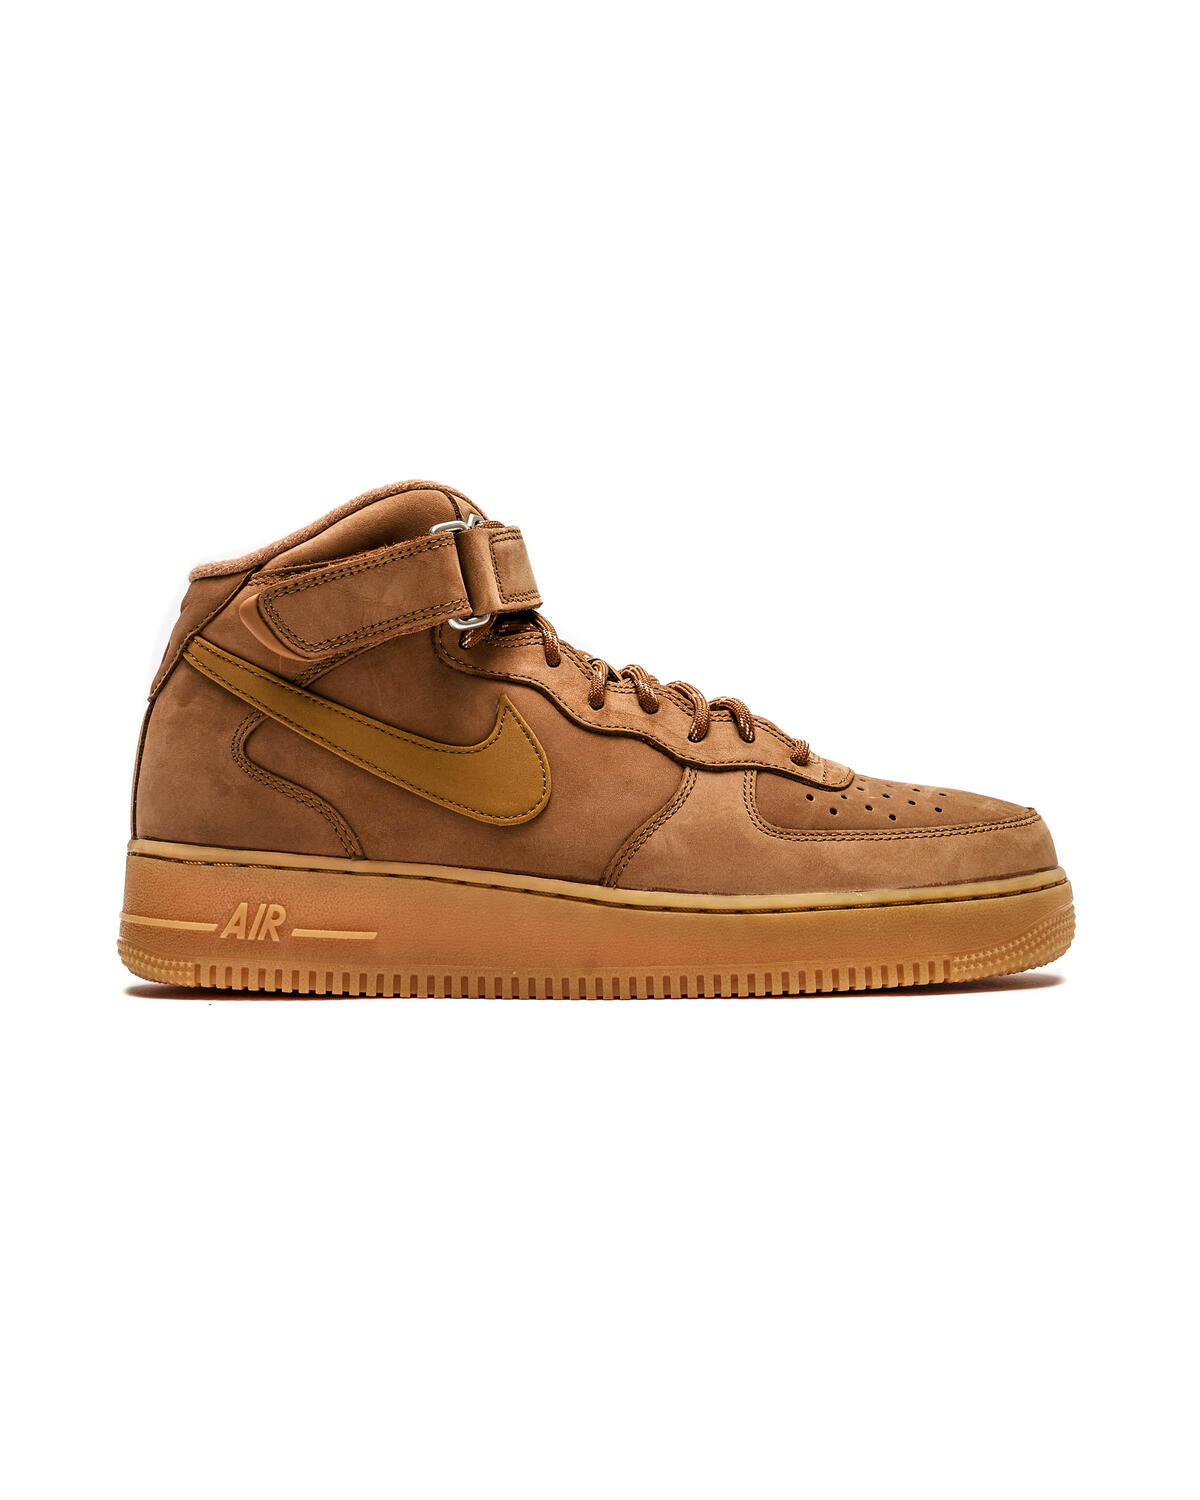 Size+6.5+-+Nike+Air+Force+1+High+Black+Suede+Gum for sale online